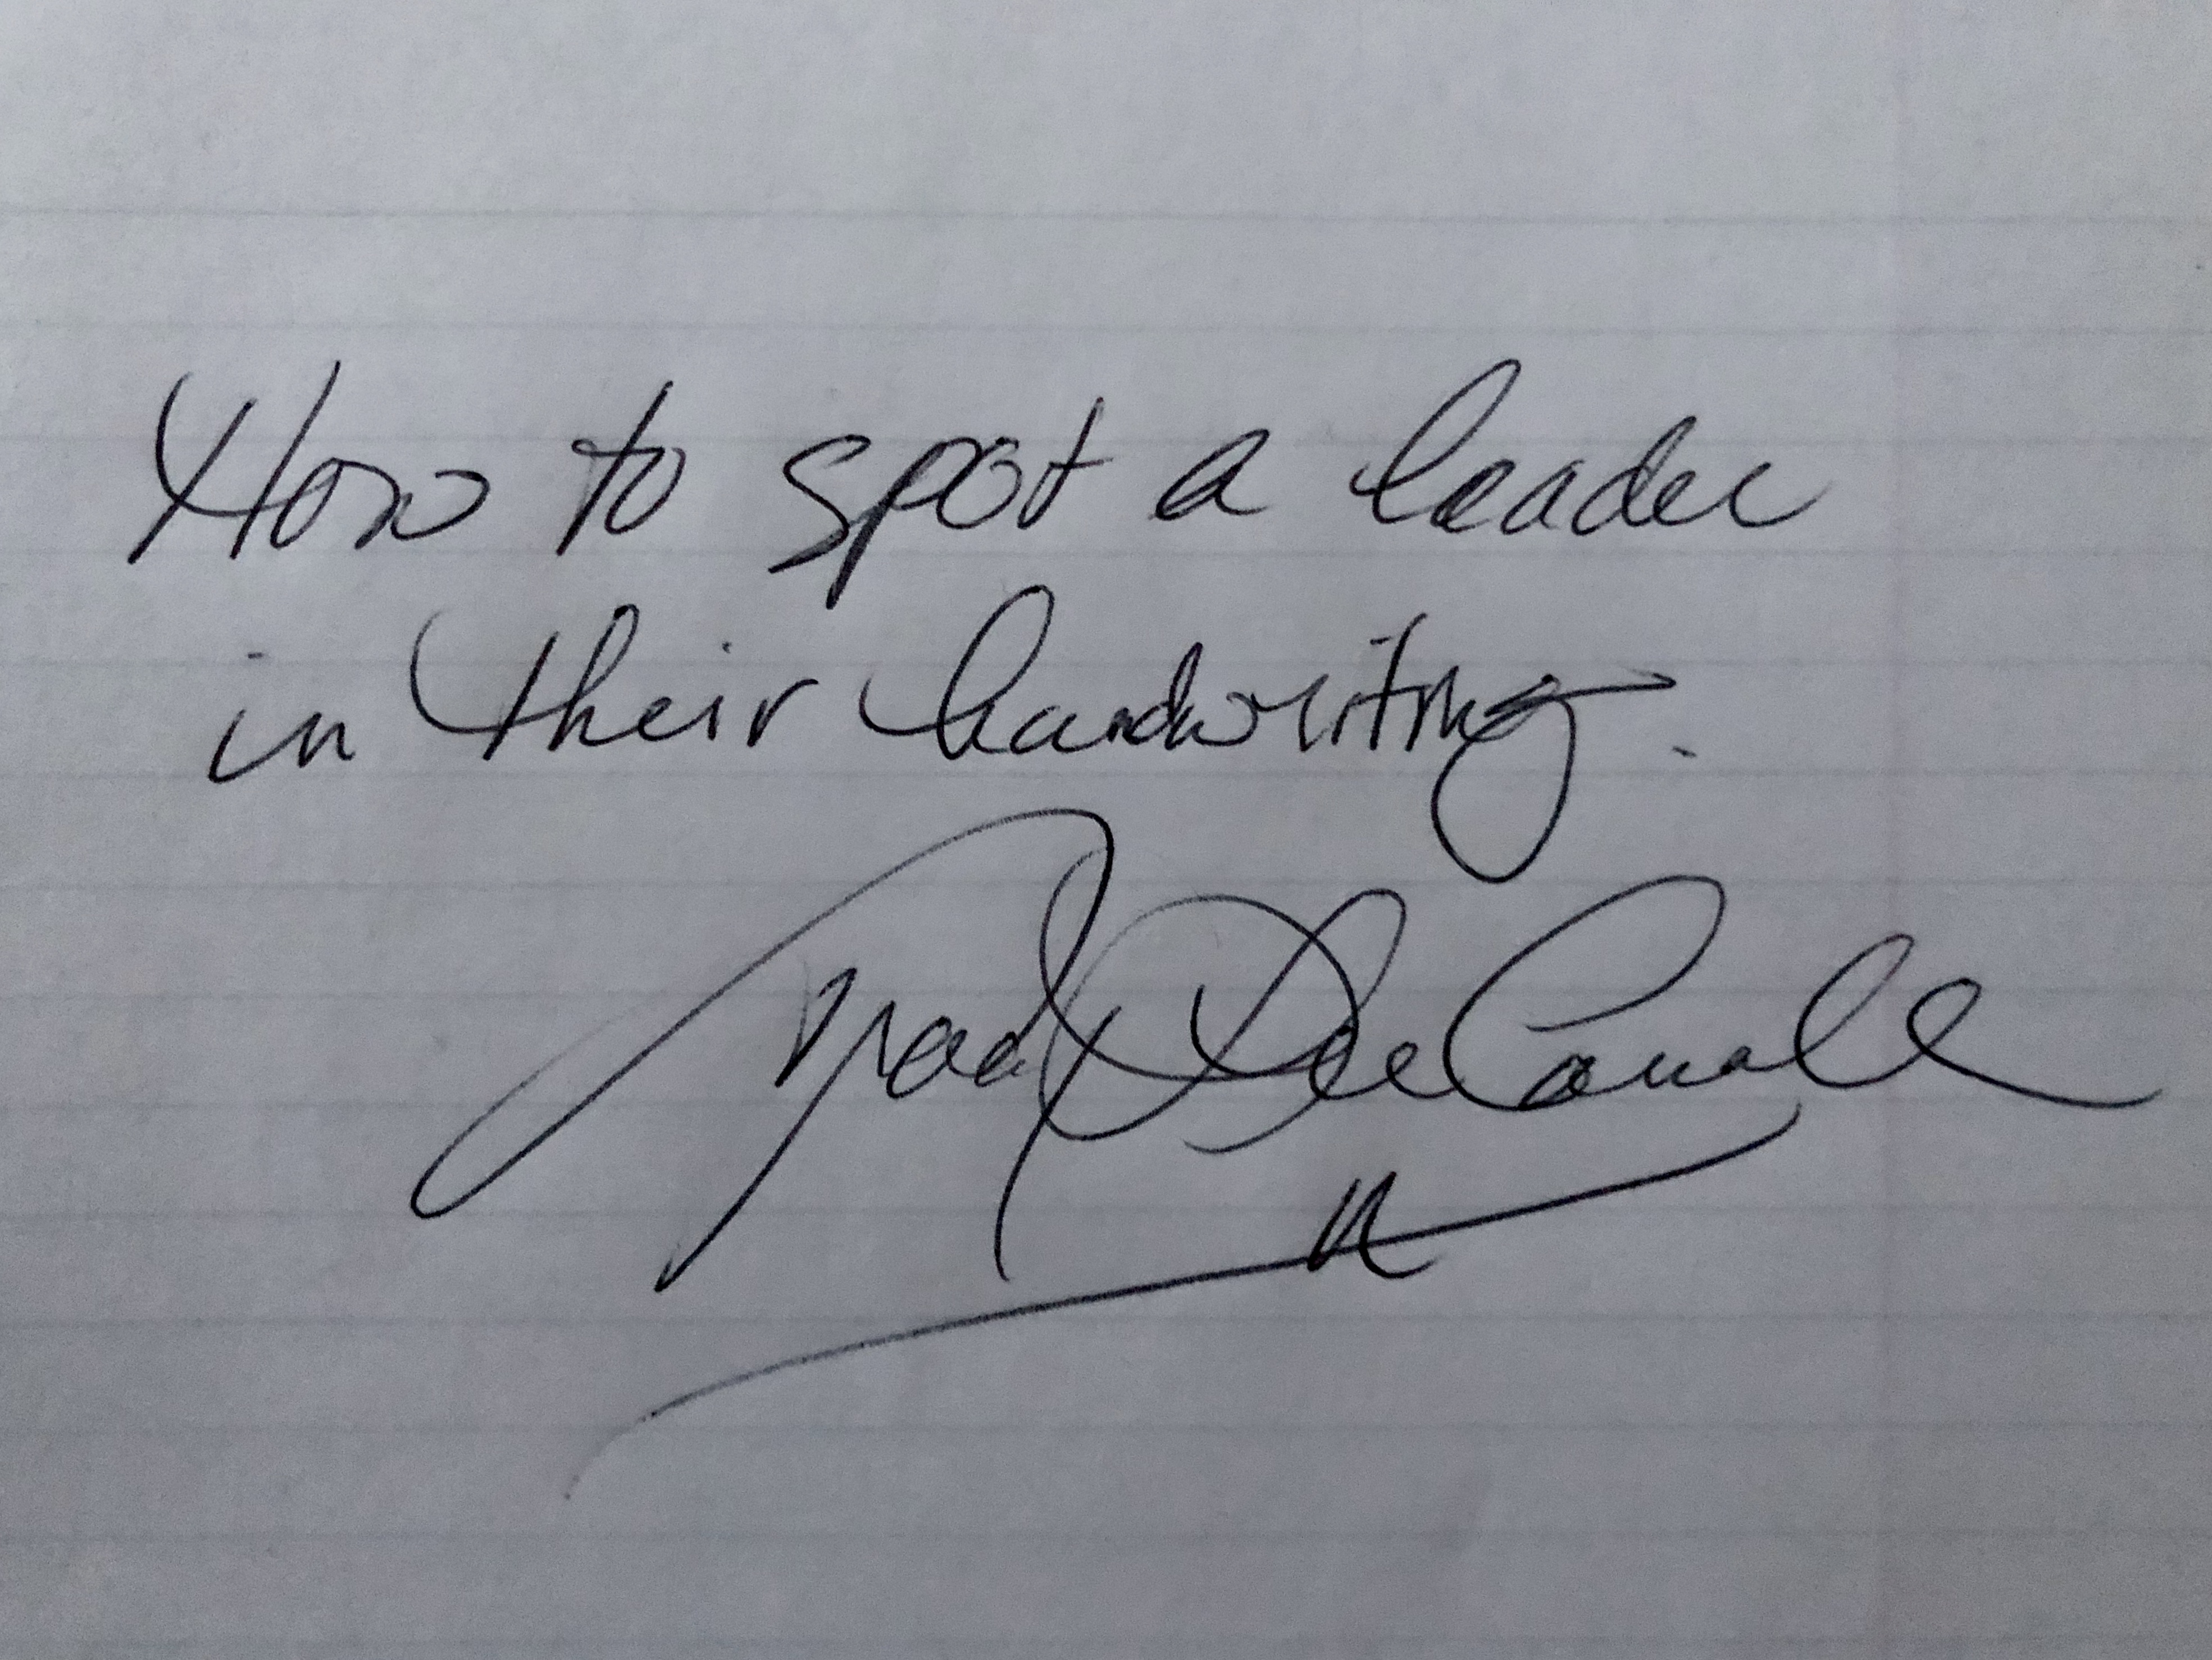 How to spot a leader in their handwriting.